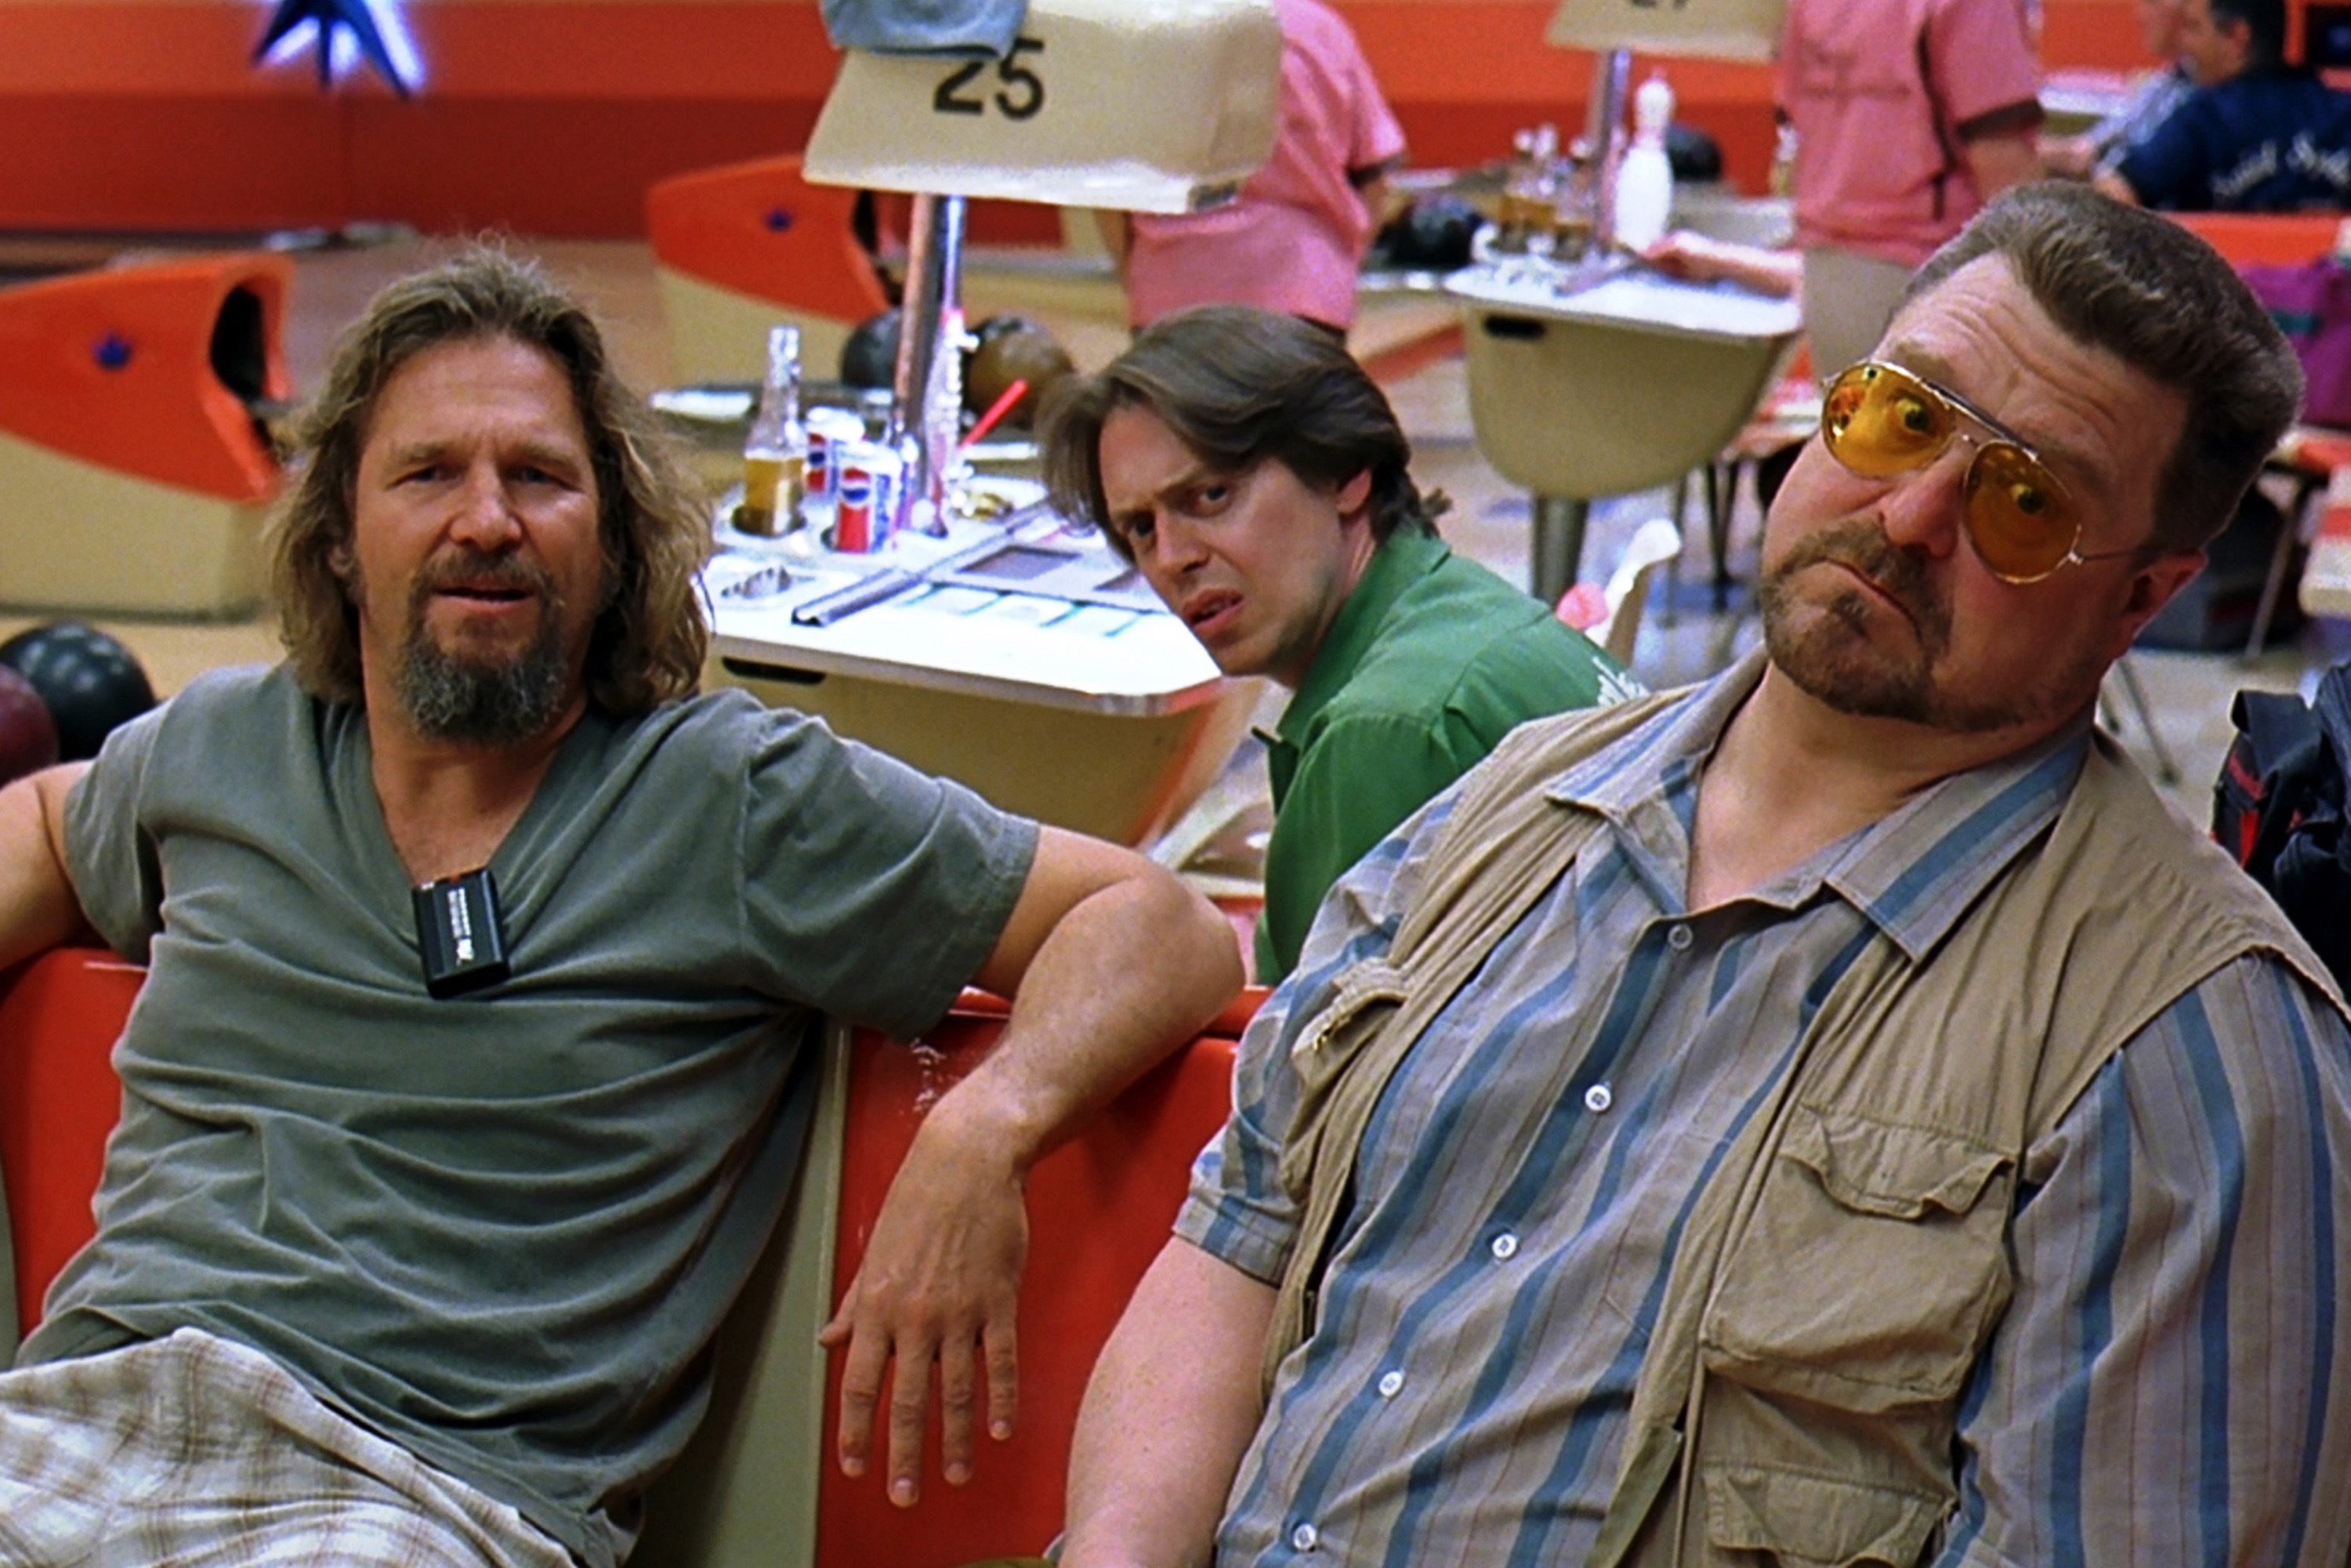 Jeff Bridges as “The Dude” hangs out at the bowling alley with his buddies Walter (John Goodman) and Donny (Steve Buscemi). Courtesy Universal Studios.